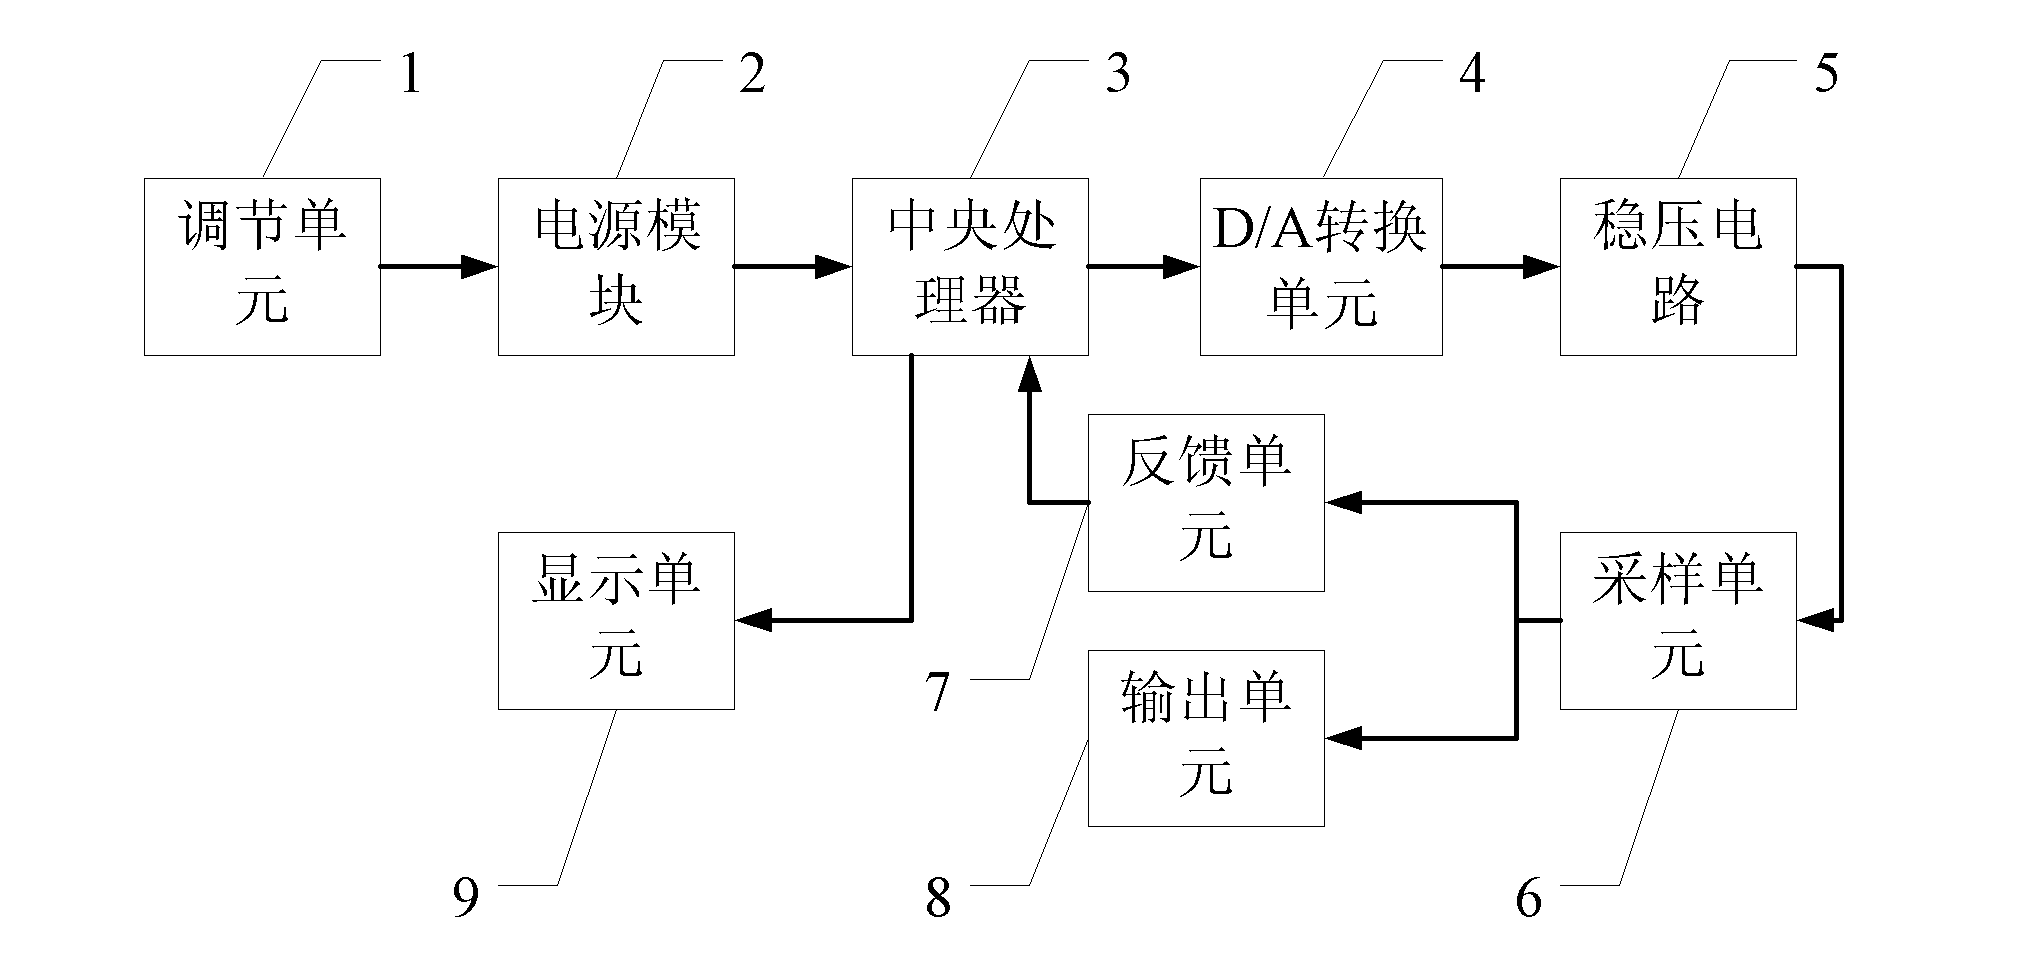 Single-power-supply non-isolated adjustable constant-current source